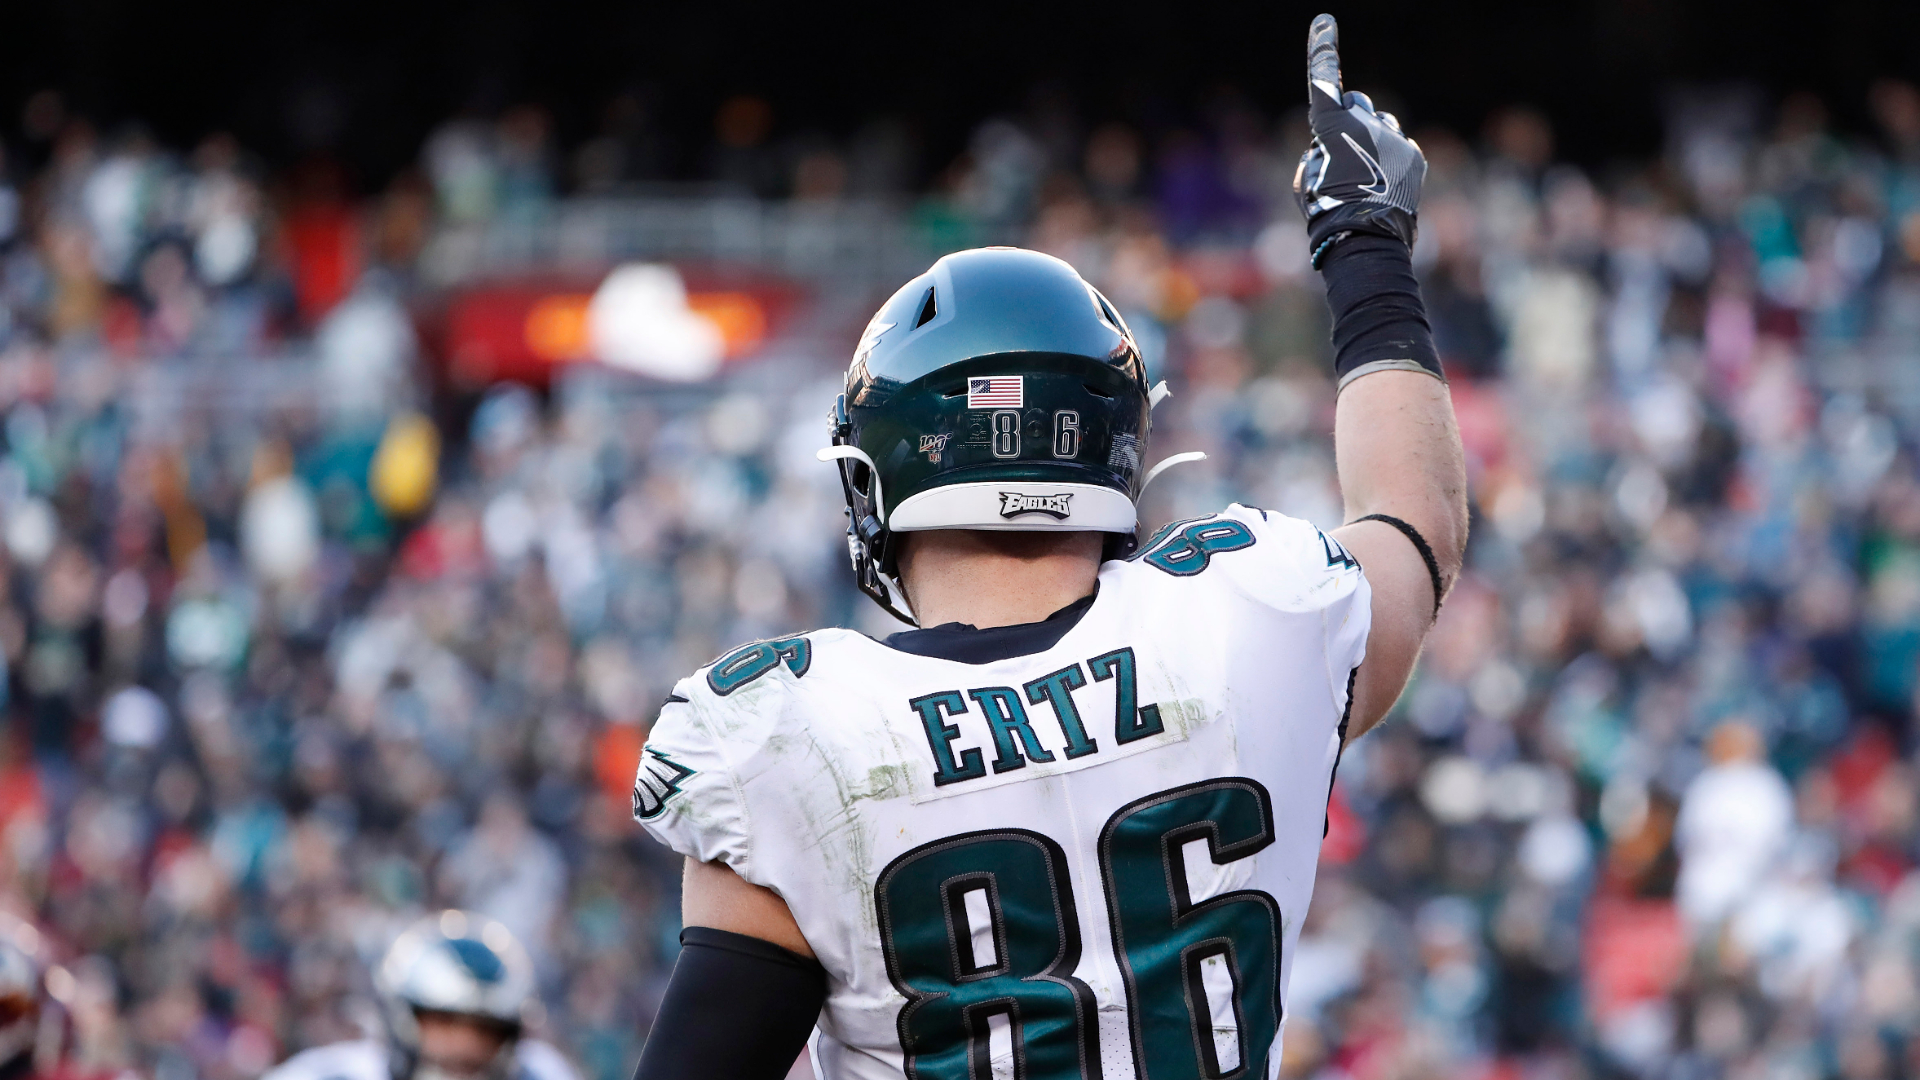 Zach Ertz is not supposed to seek a new contract after negotiating